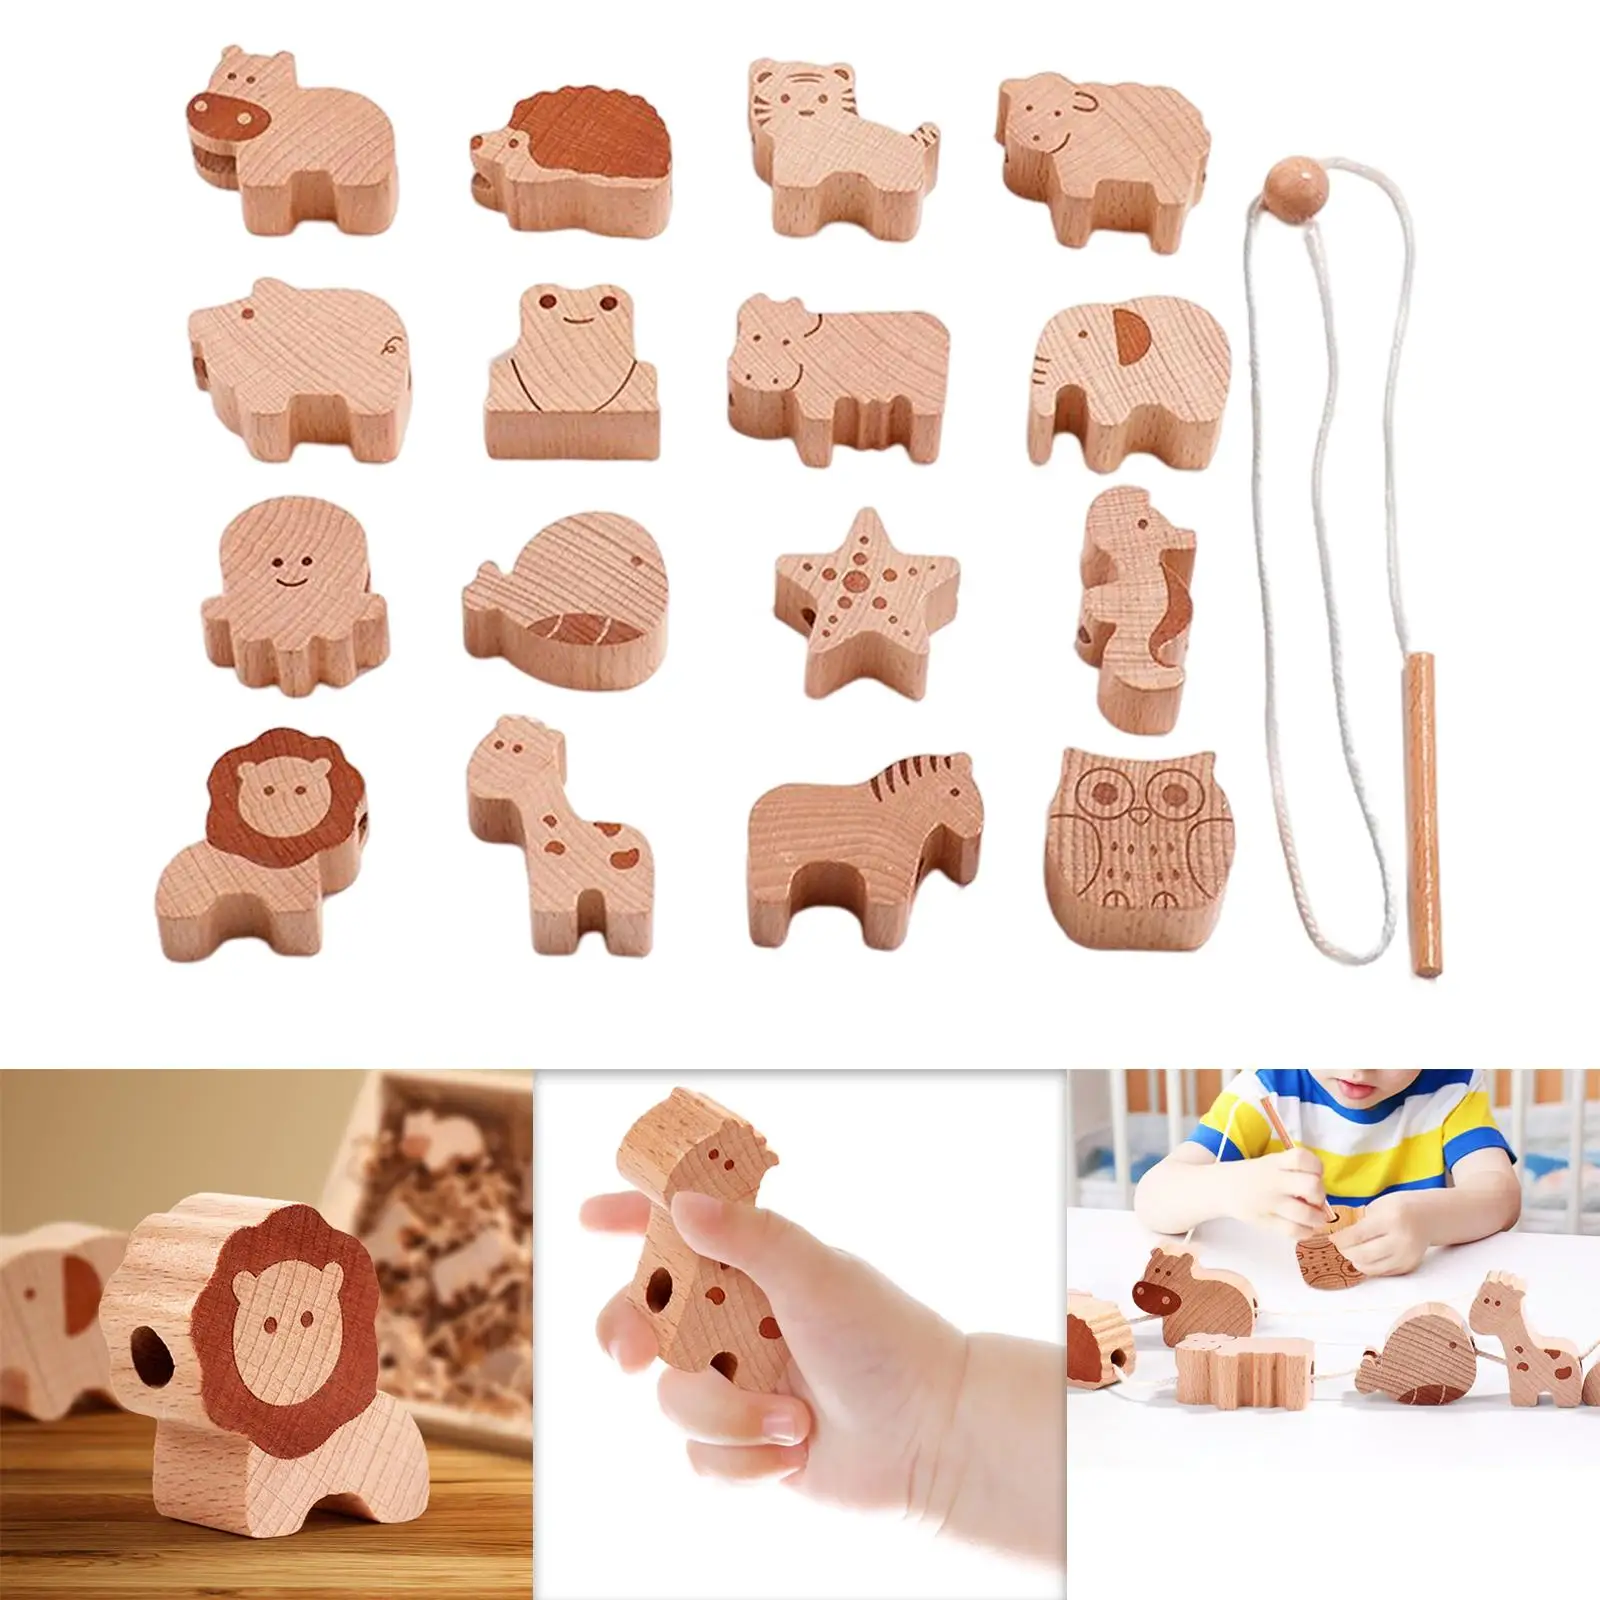 16 Pieces Animal Blocks Threading Toy Learning Activities for Birthday Gift